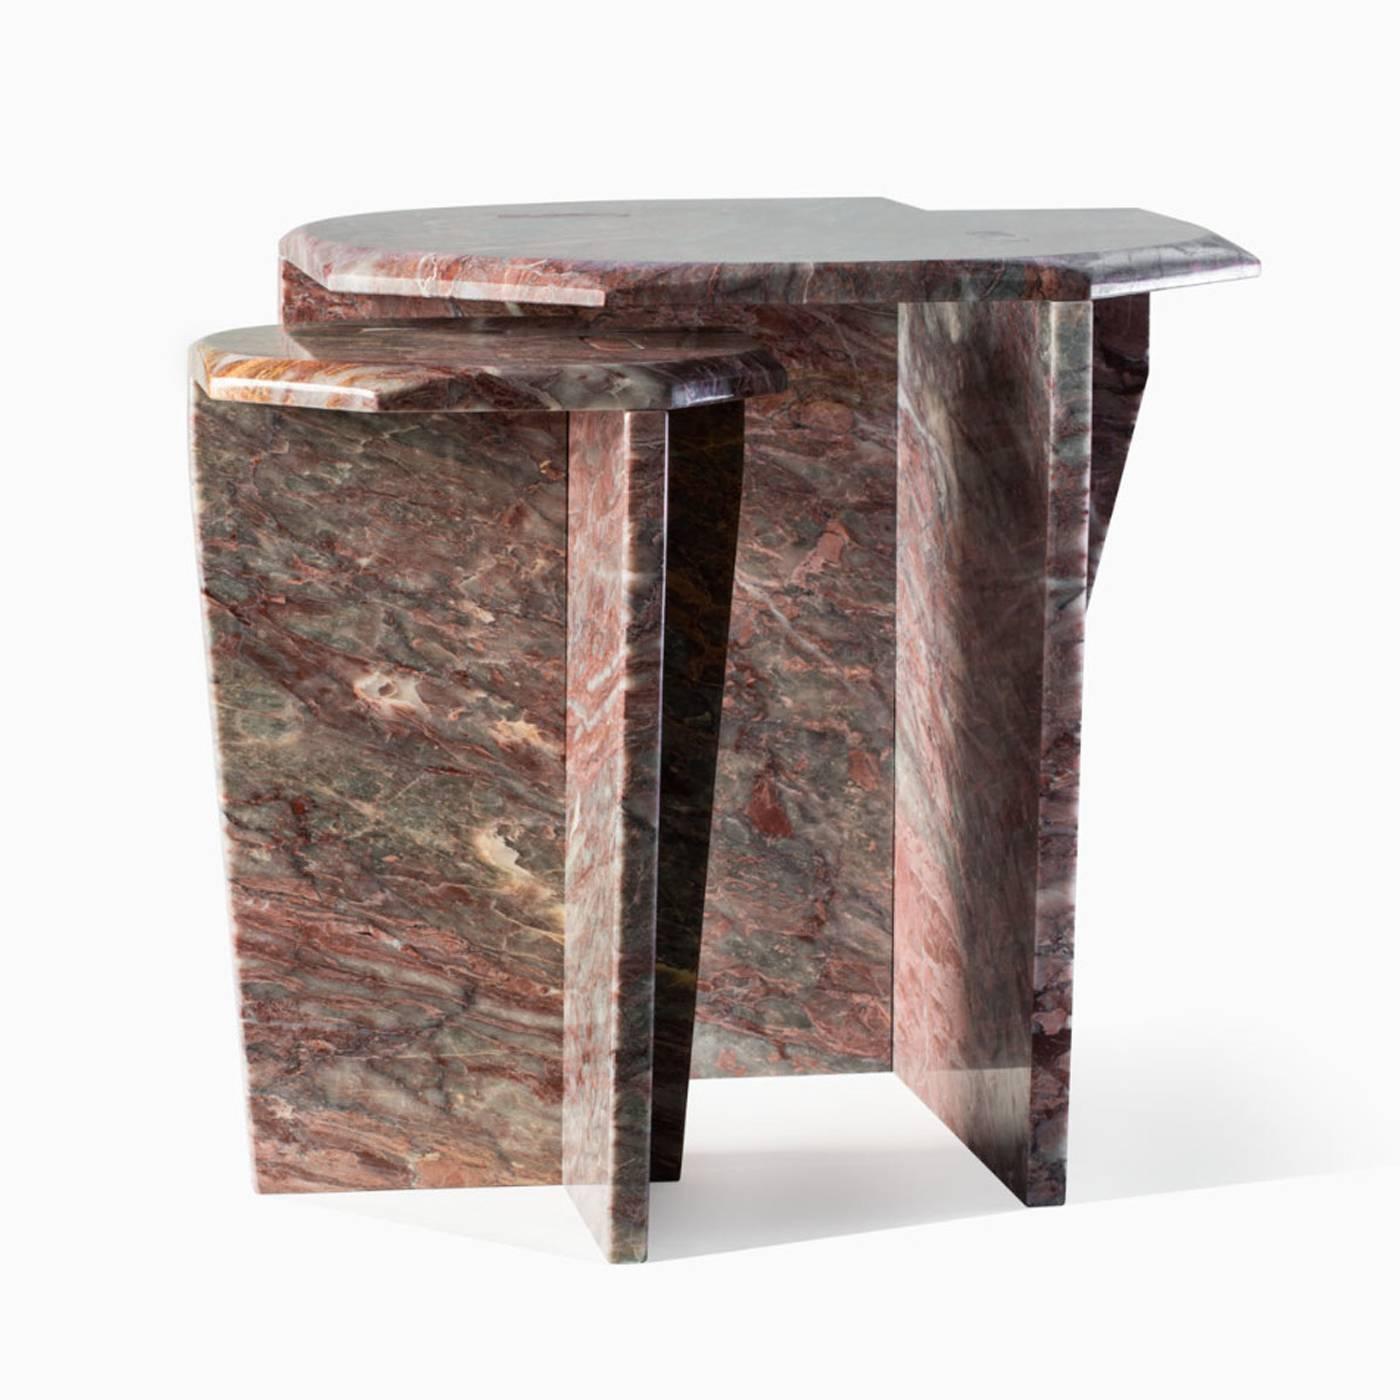 This striking marble coffee table rests on one central leg and it is made of 2 cm. thick Salomé marble. Top and support are connected with a dry joint with no glue nor screws and is the slightly larger version of the Z2 coffee table. It is very